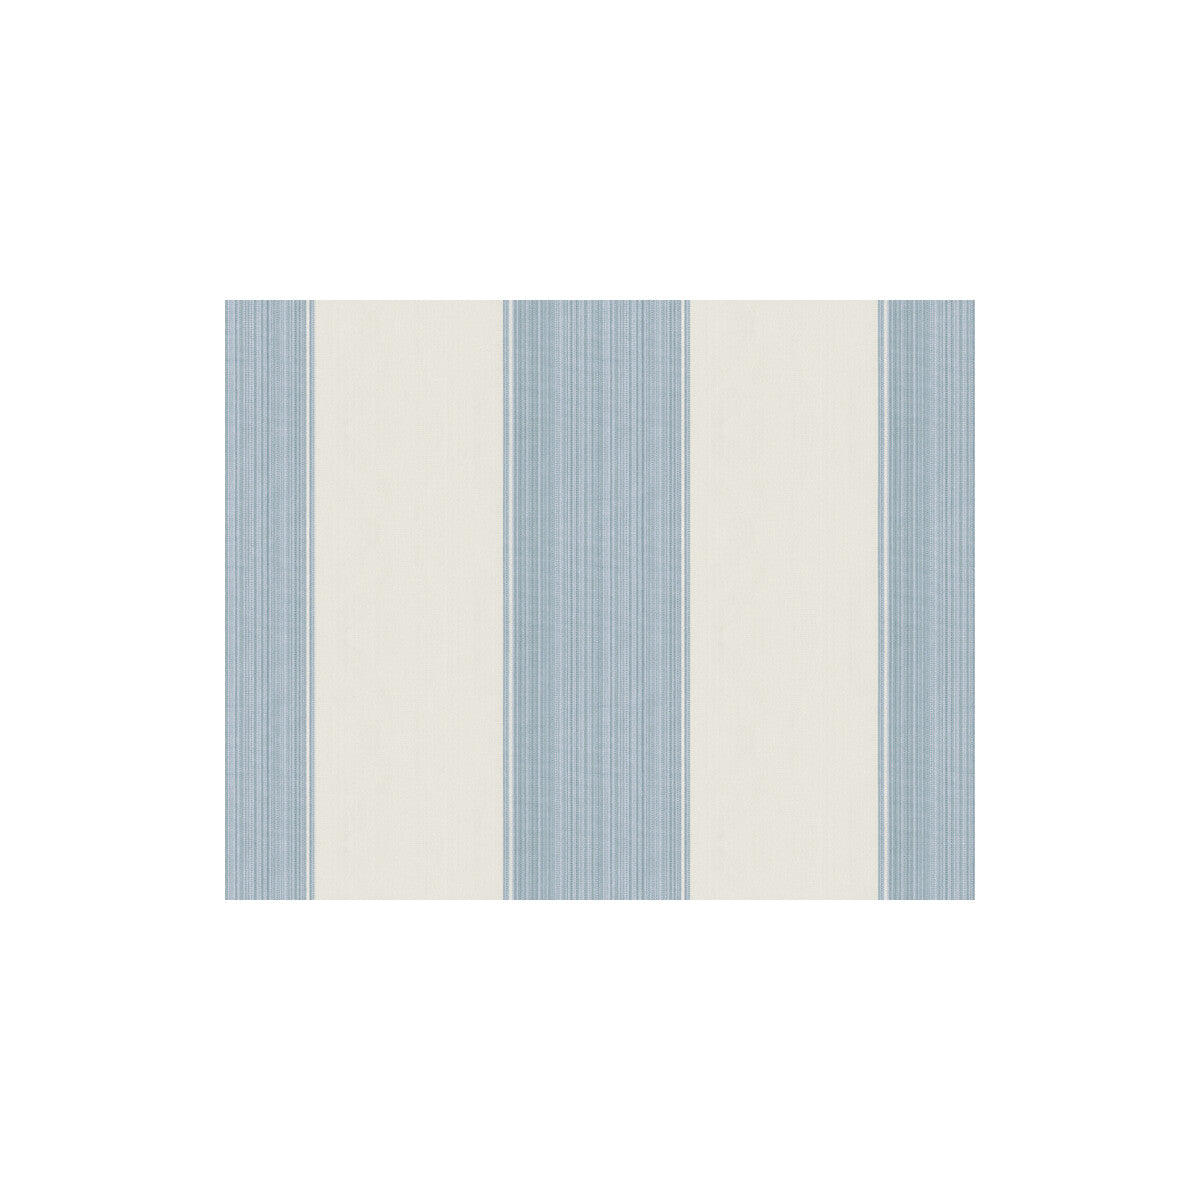 Granby fabric in chambray color - pattern 32997.15.0 - by Kravet Basics in the Sarah Richardson Affinity collection